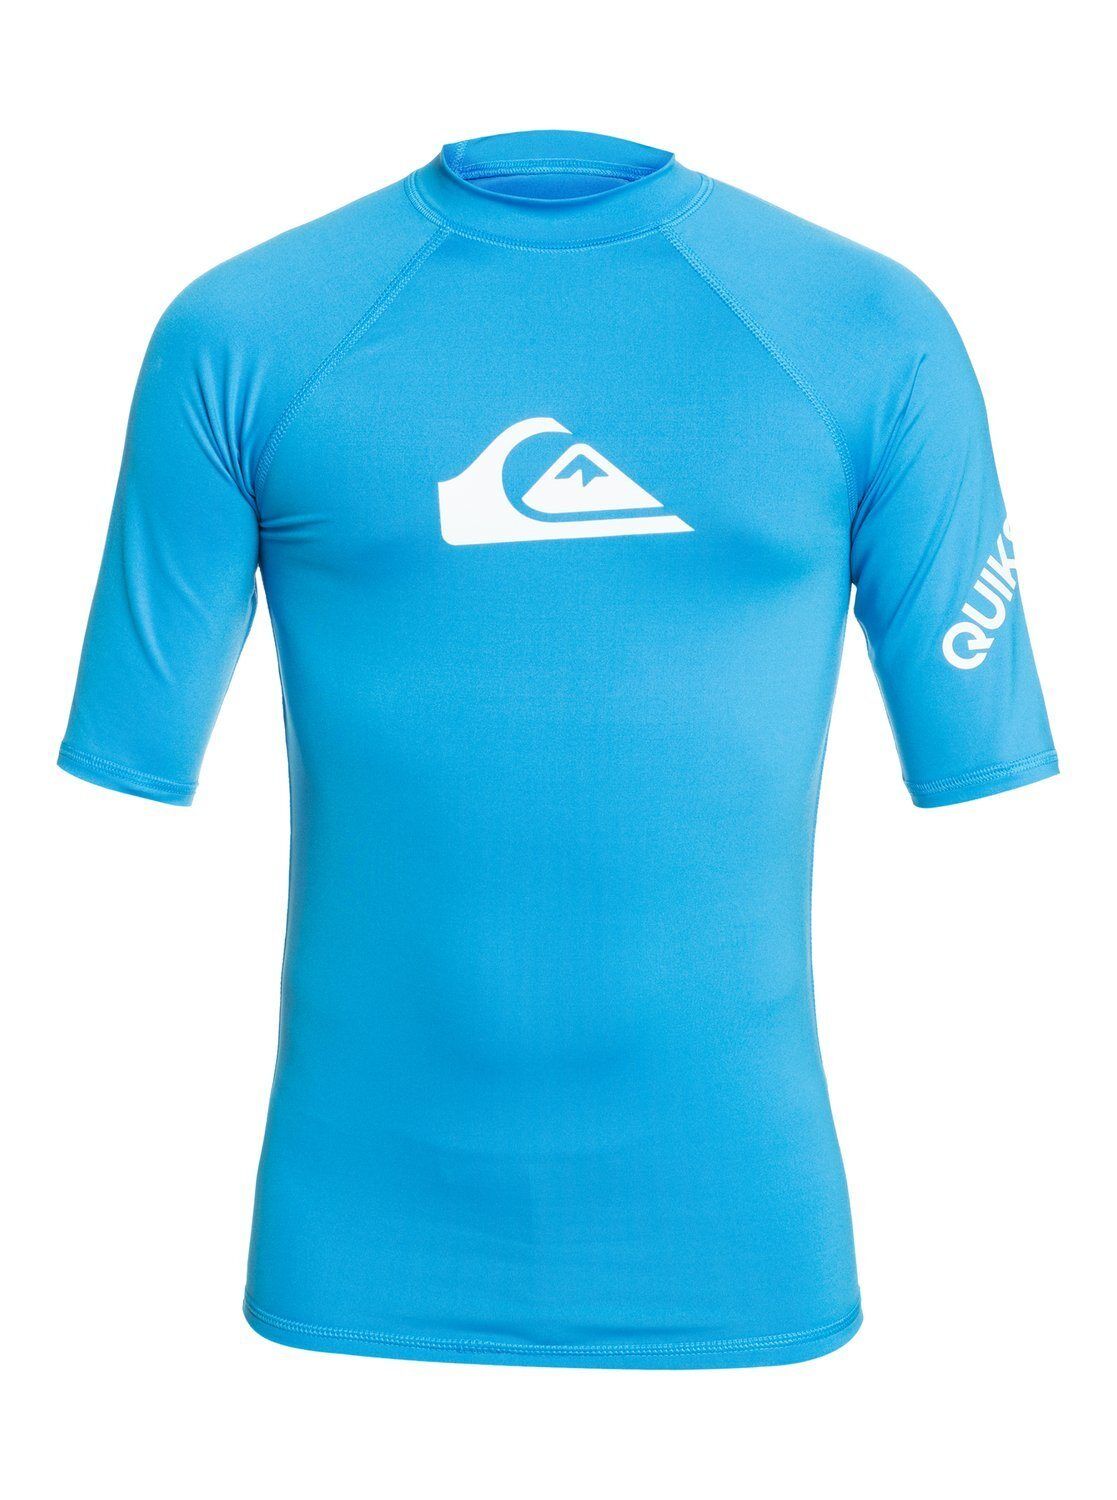 Quiksilver Funktionsshirt »All Time«, blau